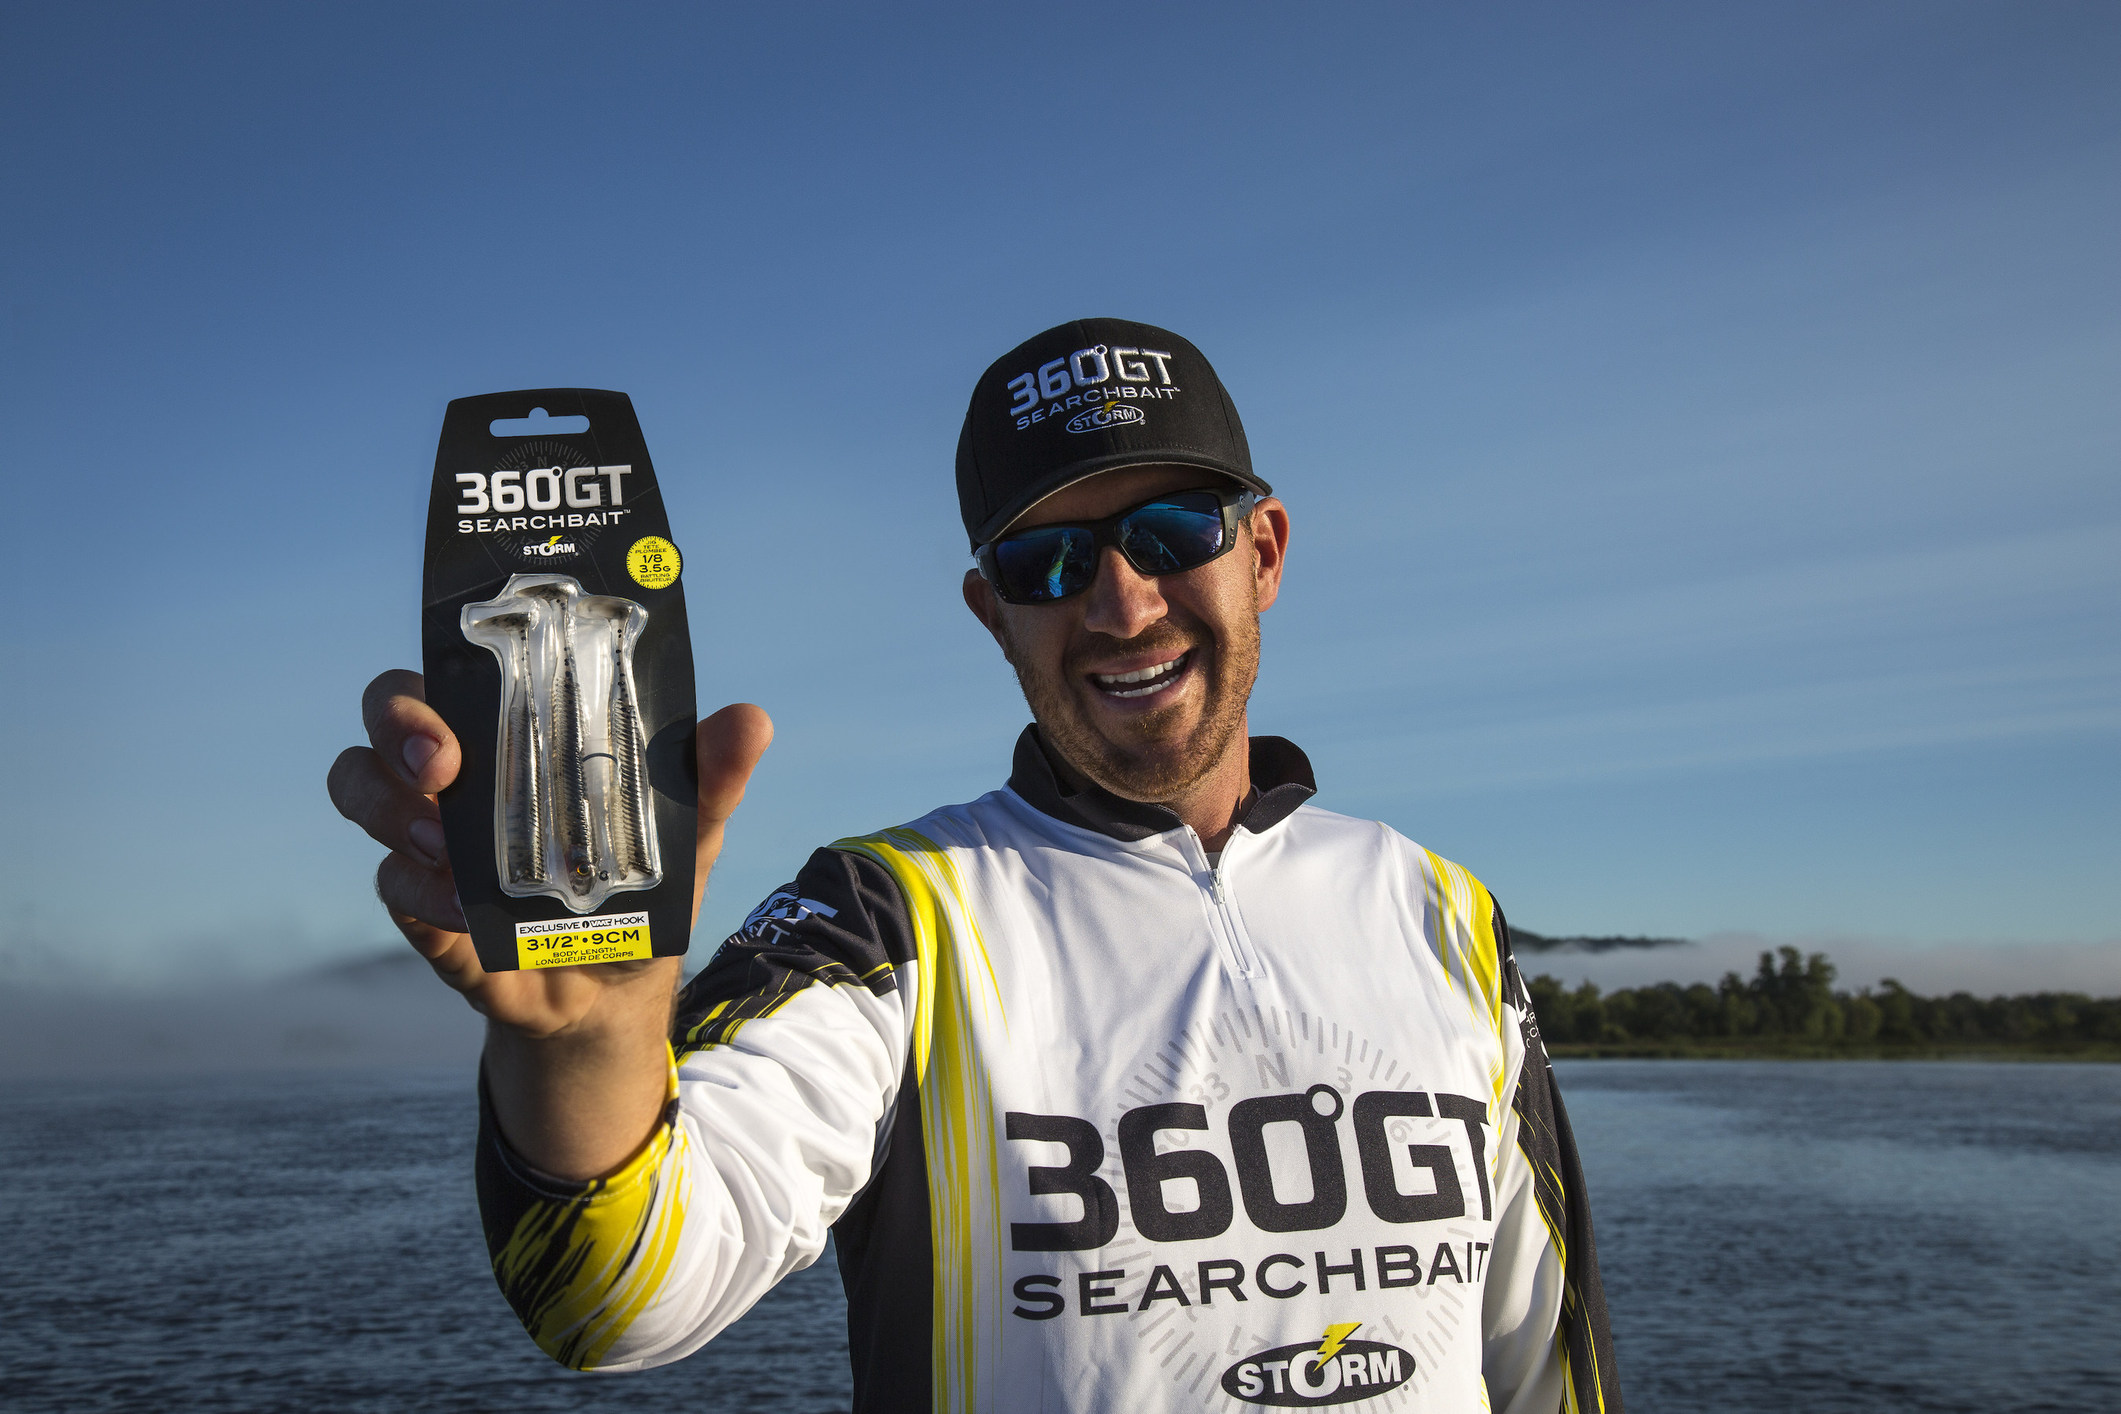 Storm® 360GT Searchbait™ Covers More Water, Uncovers More Fish